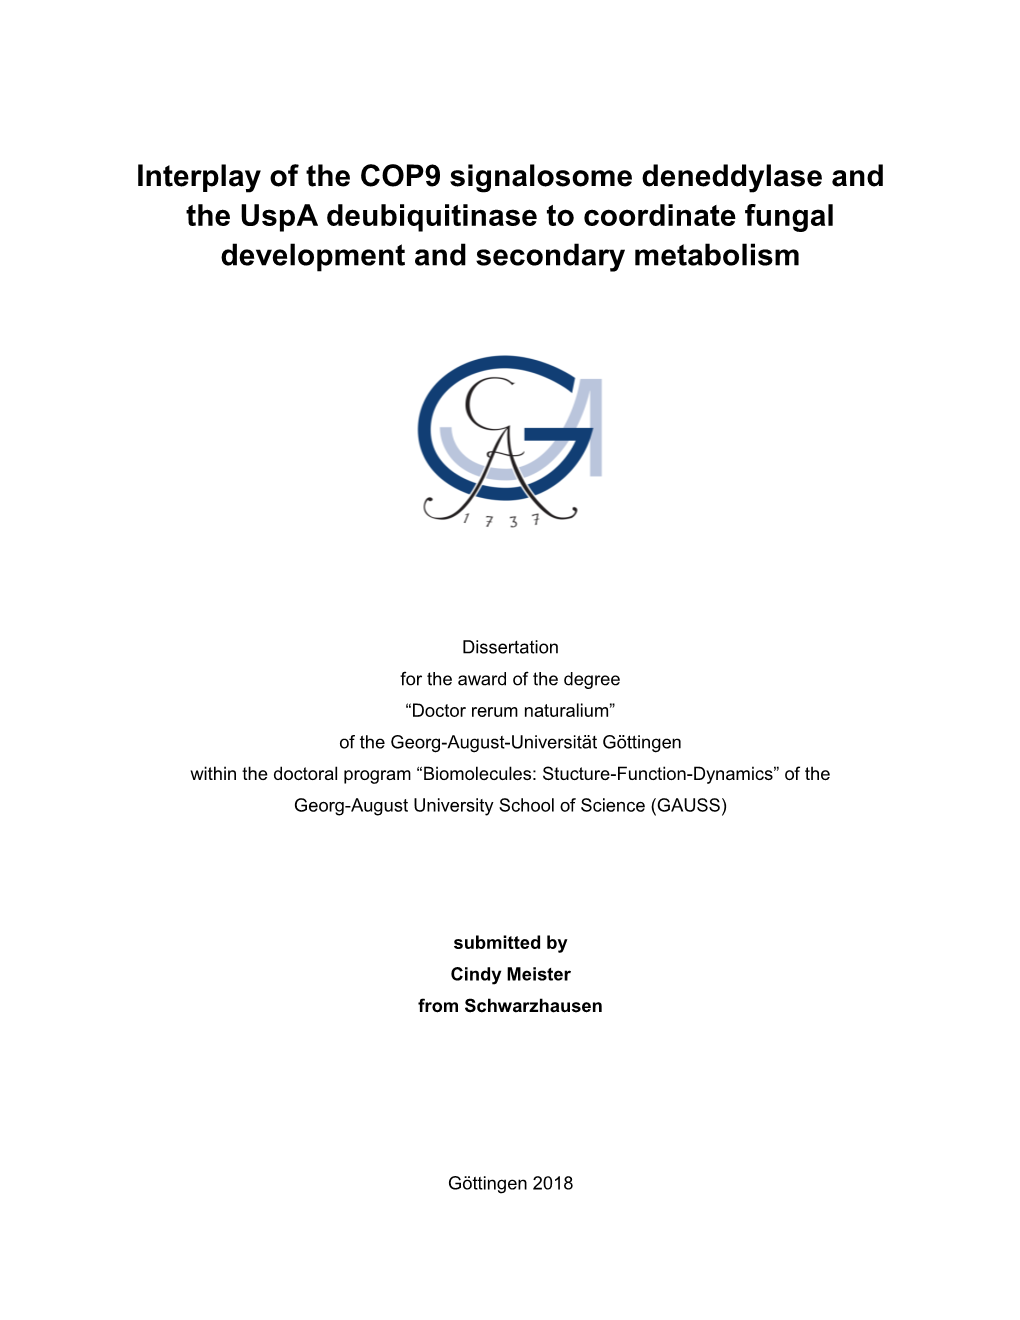 Interplay of the COP9 Signalosome Deneddylase and the Uspa Deubiquitinase to Coordinate Fungal Development and Secondary Metabolism